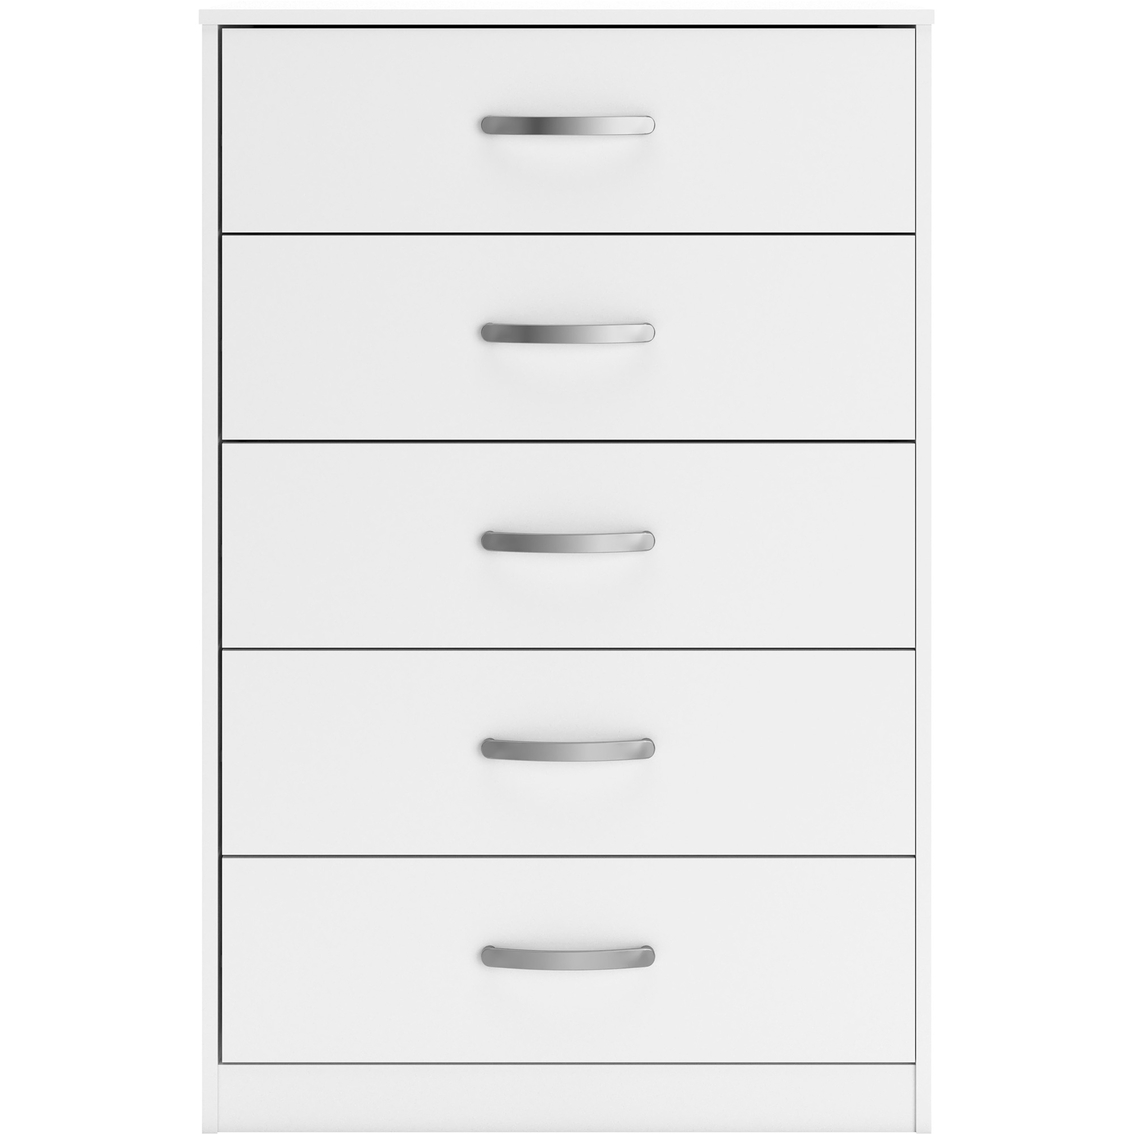 Signature Design by Ashley Flannia Chest of Drawers - Image 2 of 5